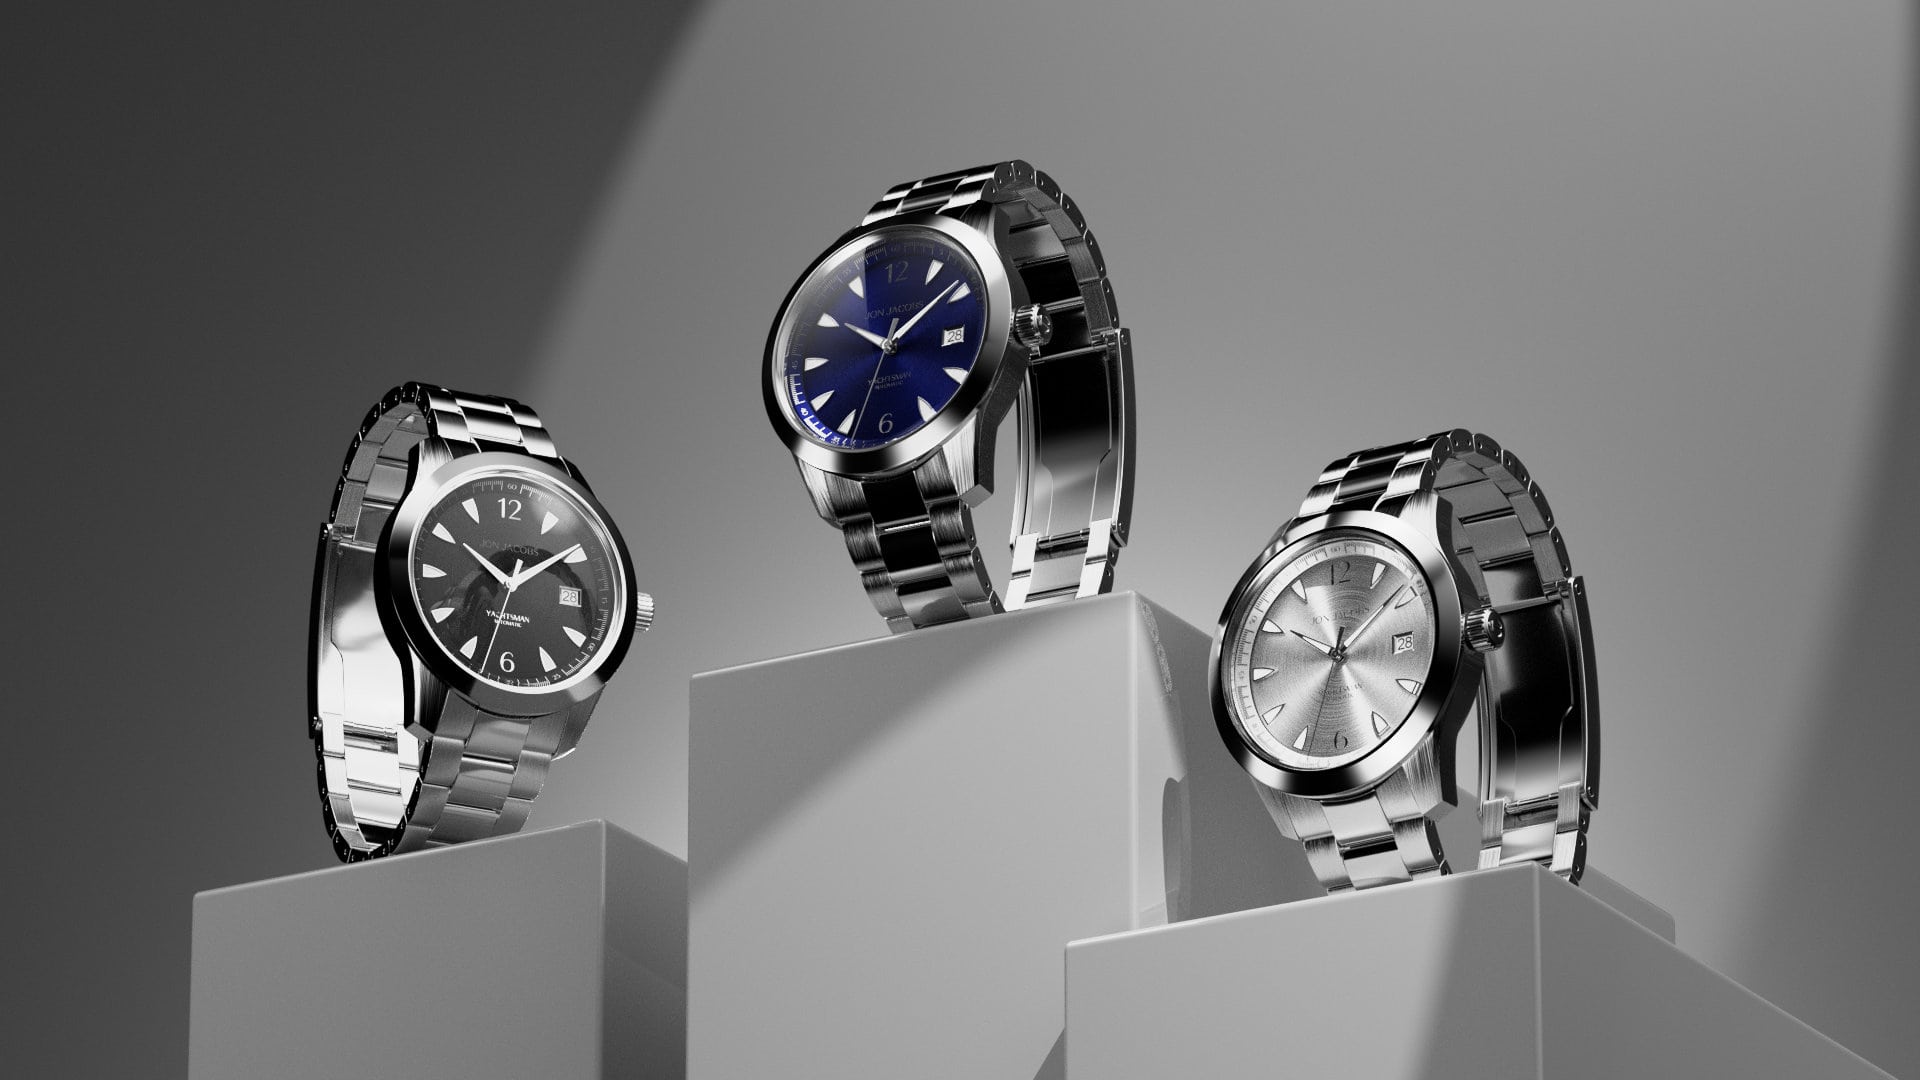 Luxury watch photography render- Product Photography Services in Miami